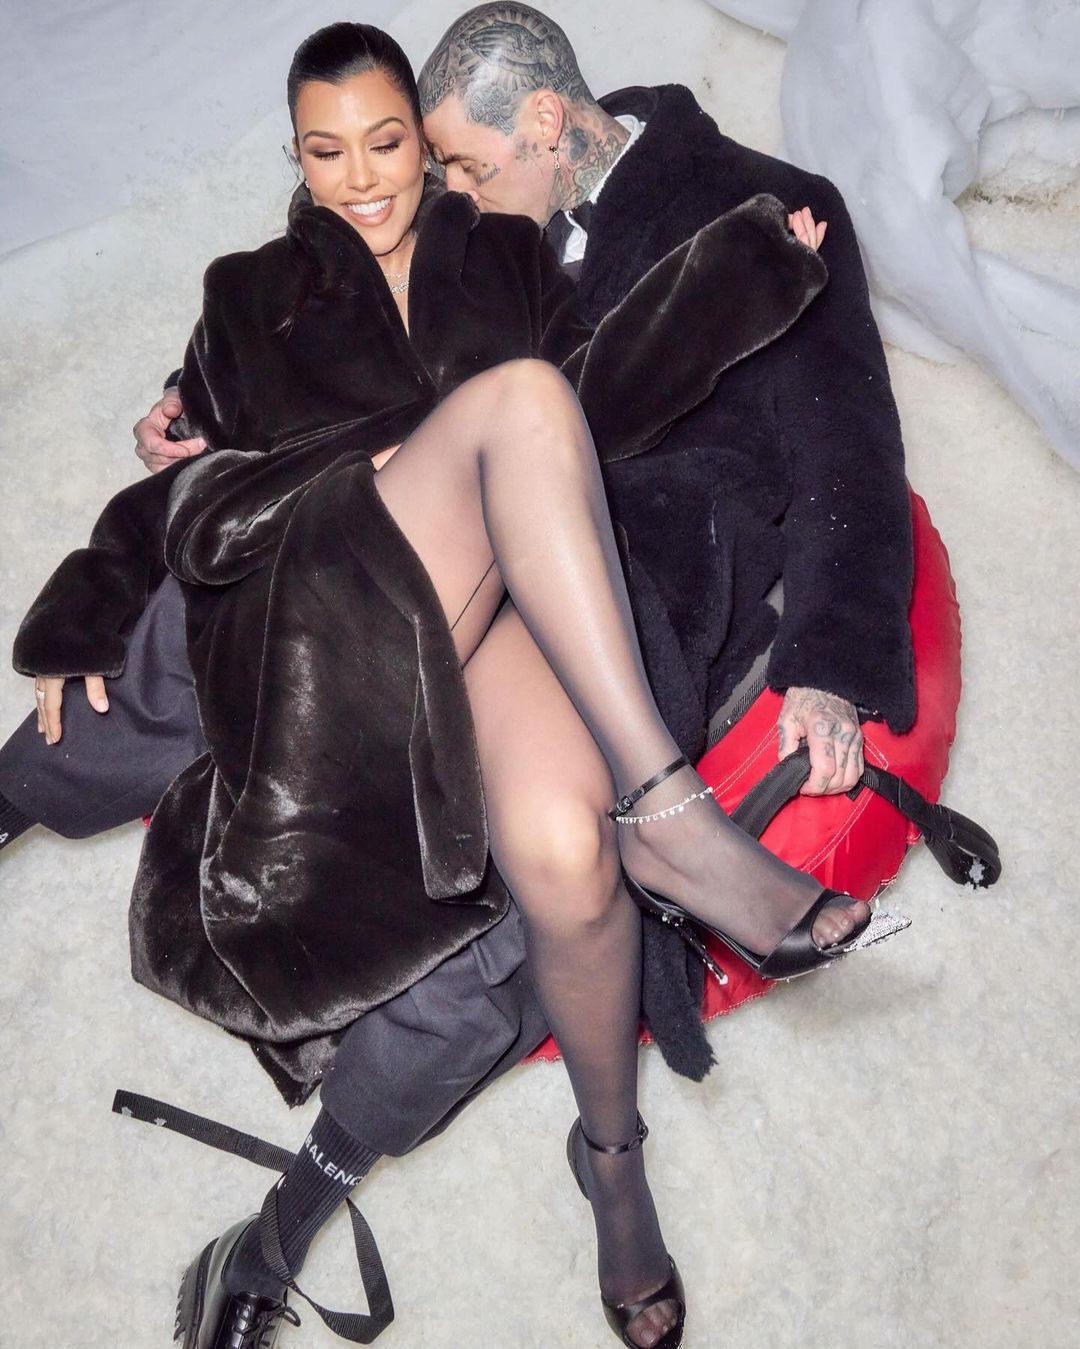 Kourtney, pictured with her husband Travis Barker, wore an oversized fur-like coat with a black bodysuit and semi-sheer black tights underneath for the party